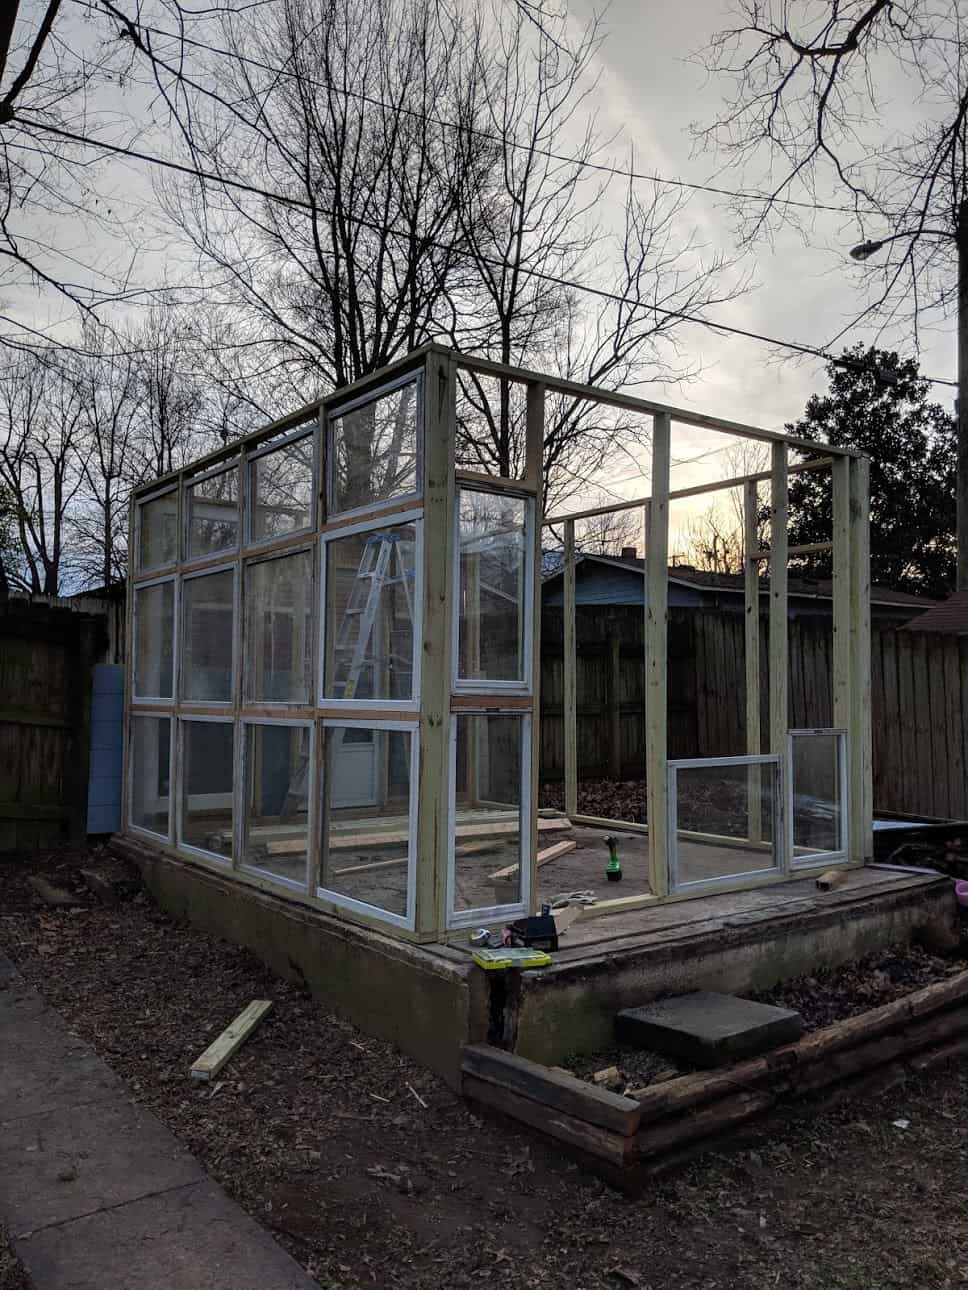 woos frame of greenhouse with old windows in it